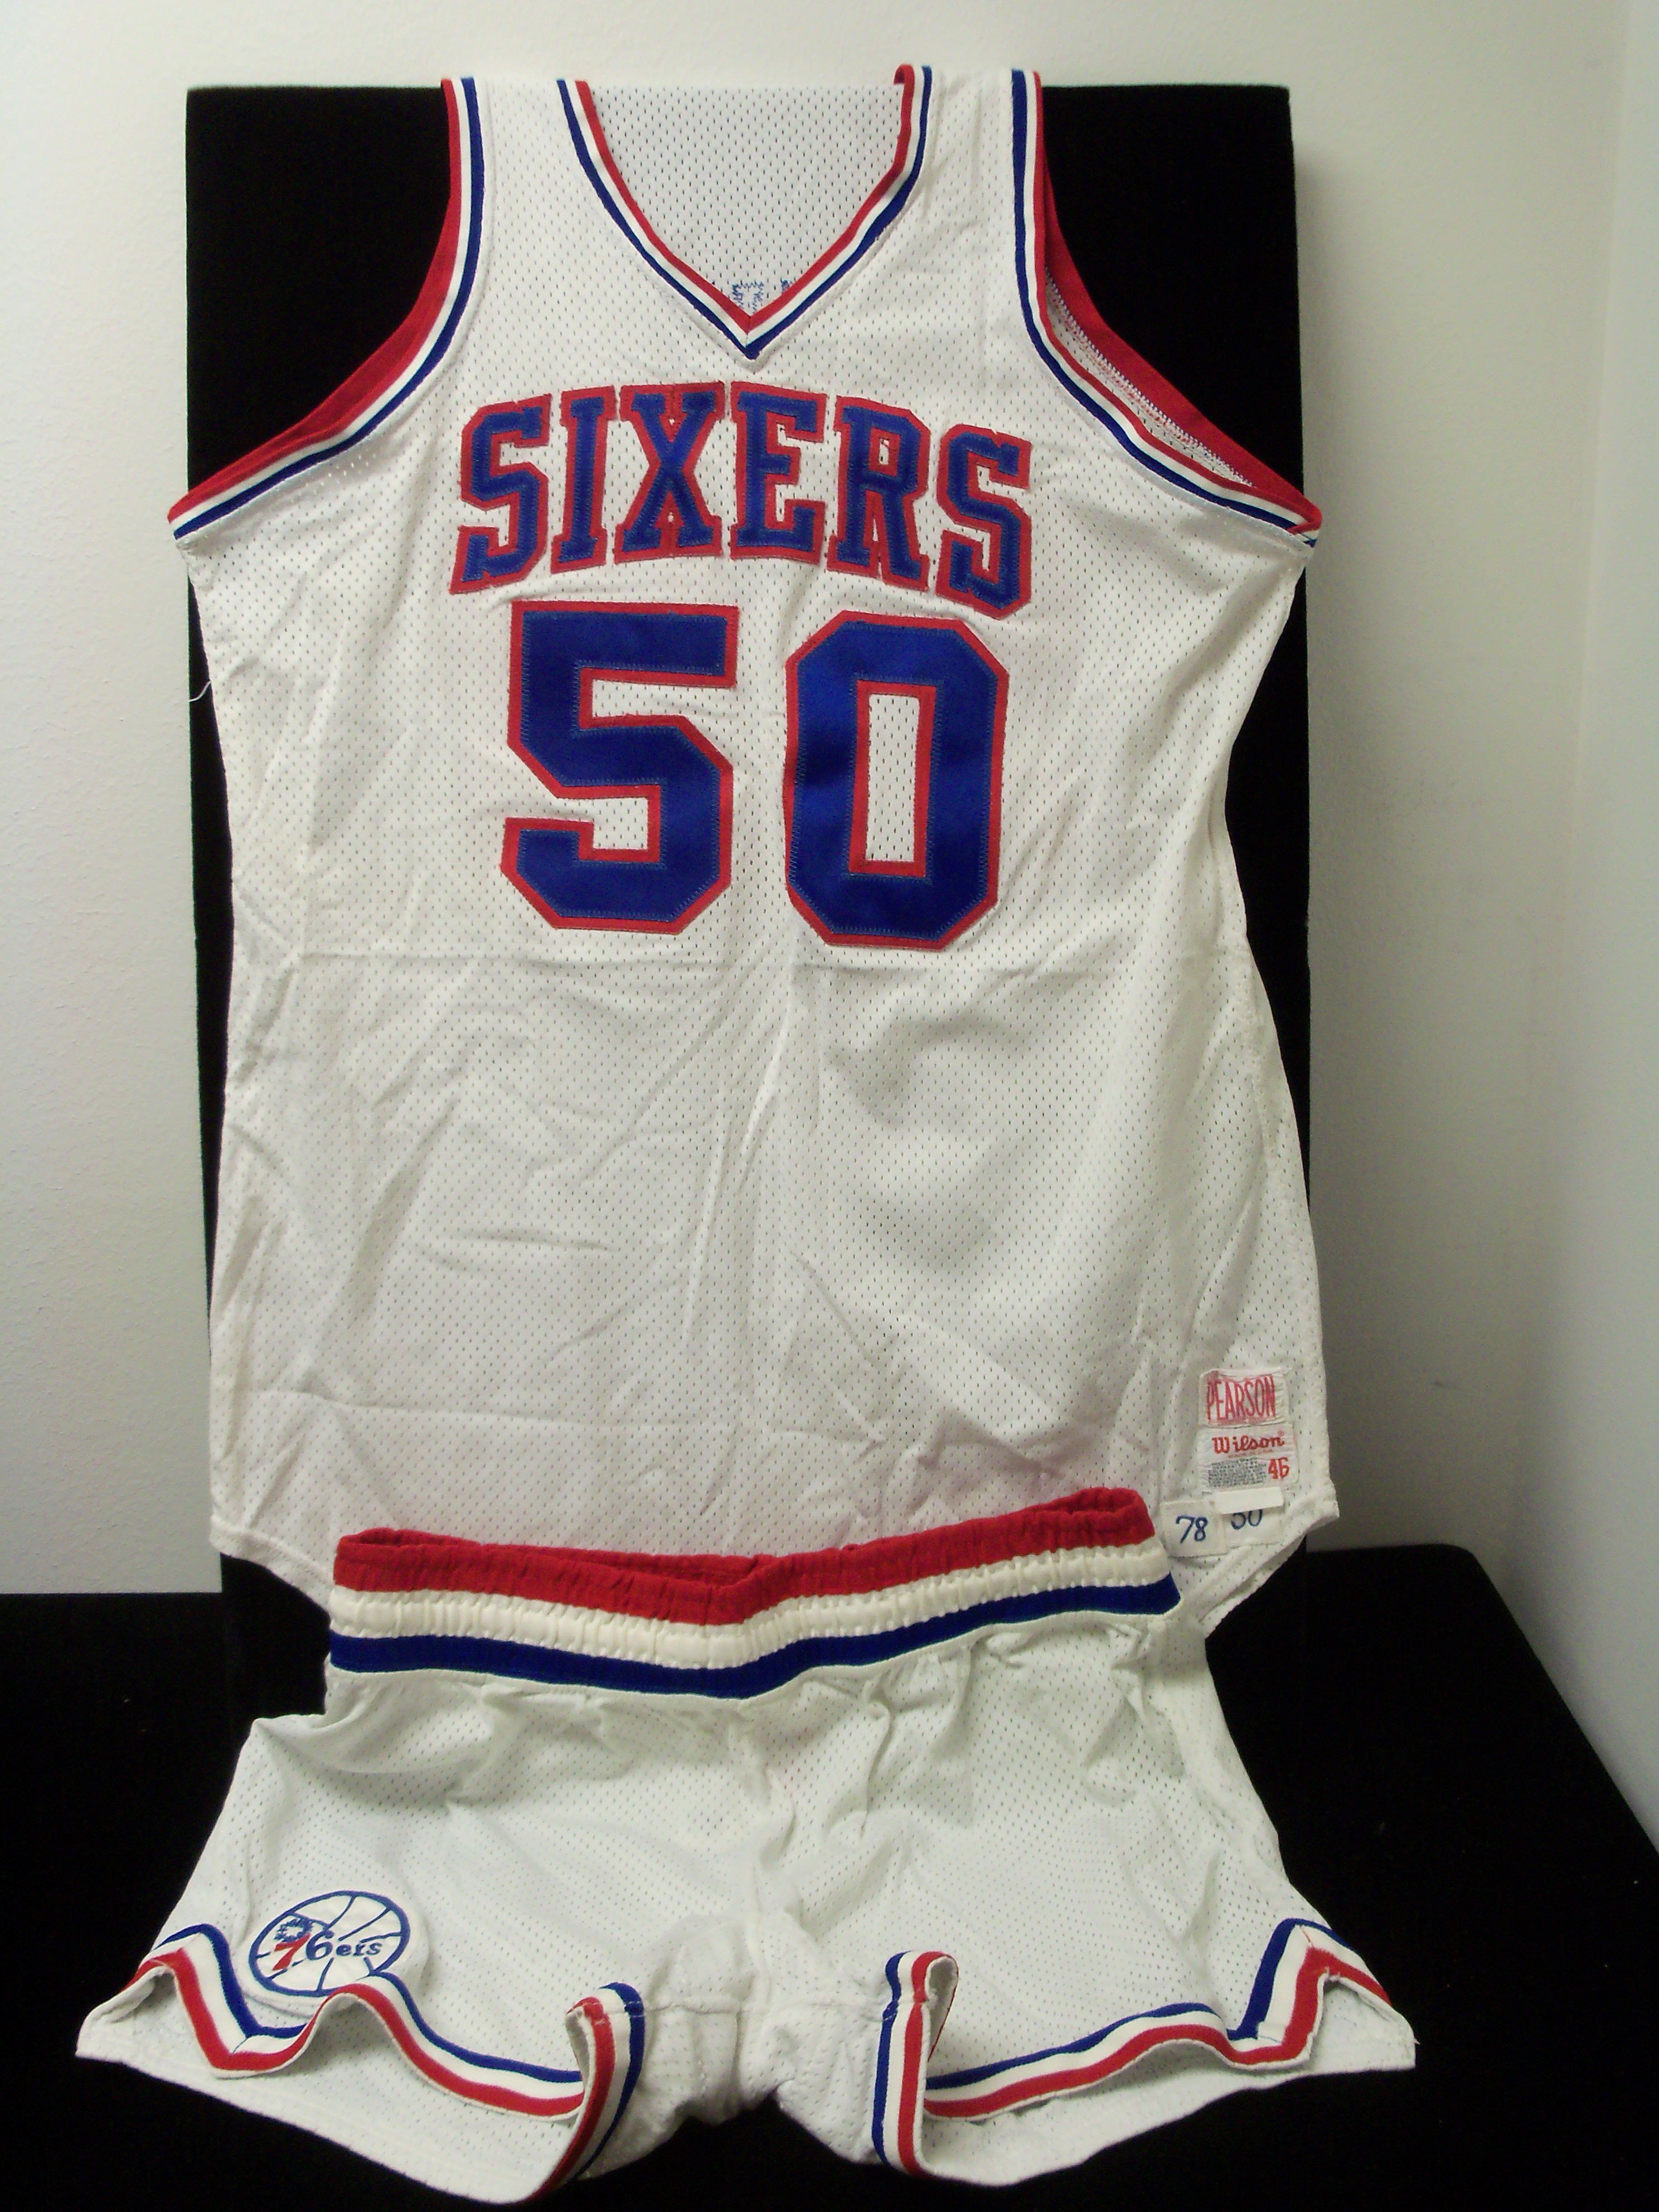 sixers jersey shorts